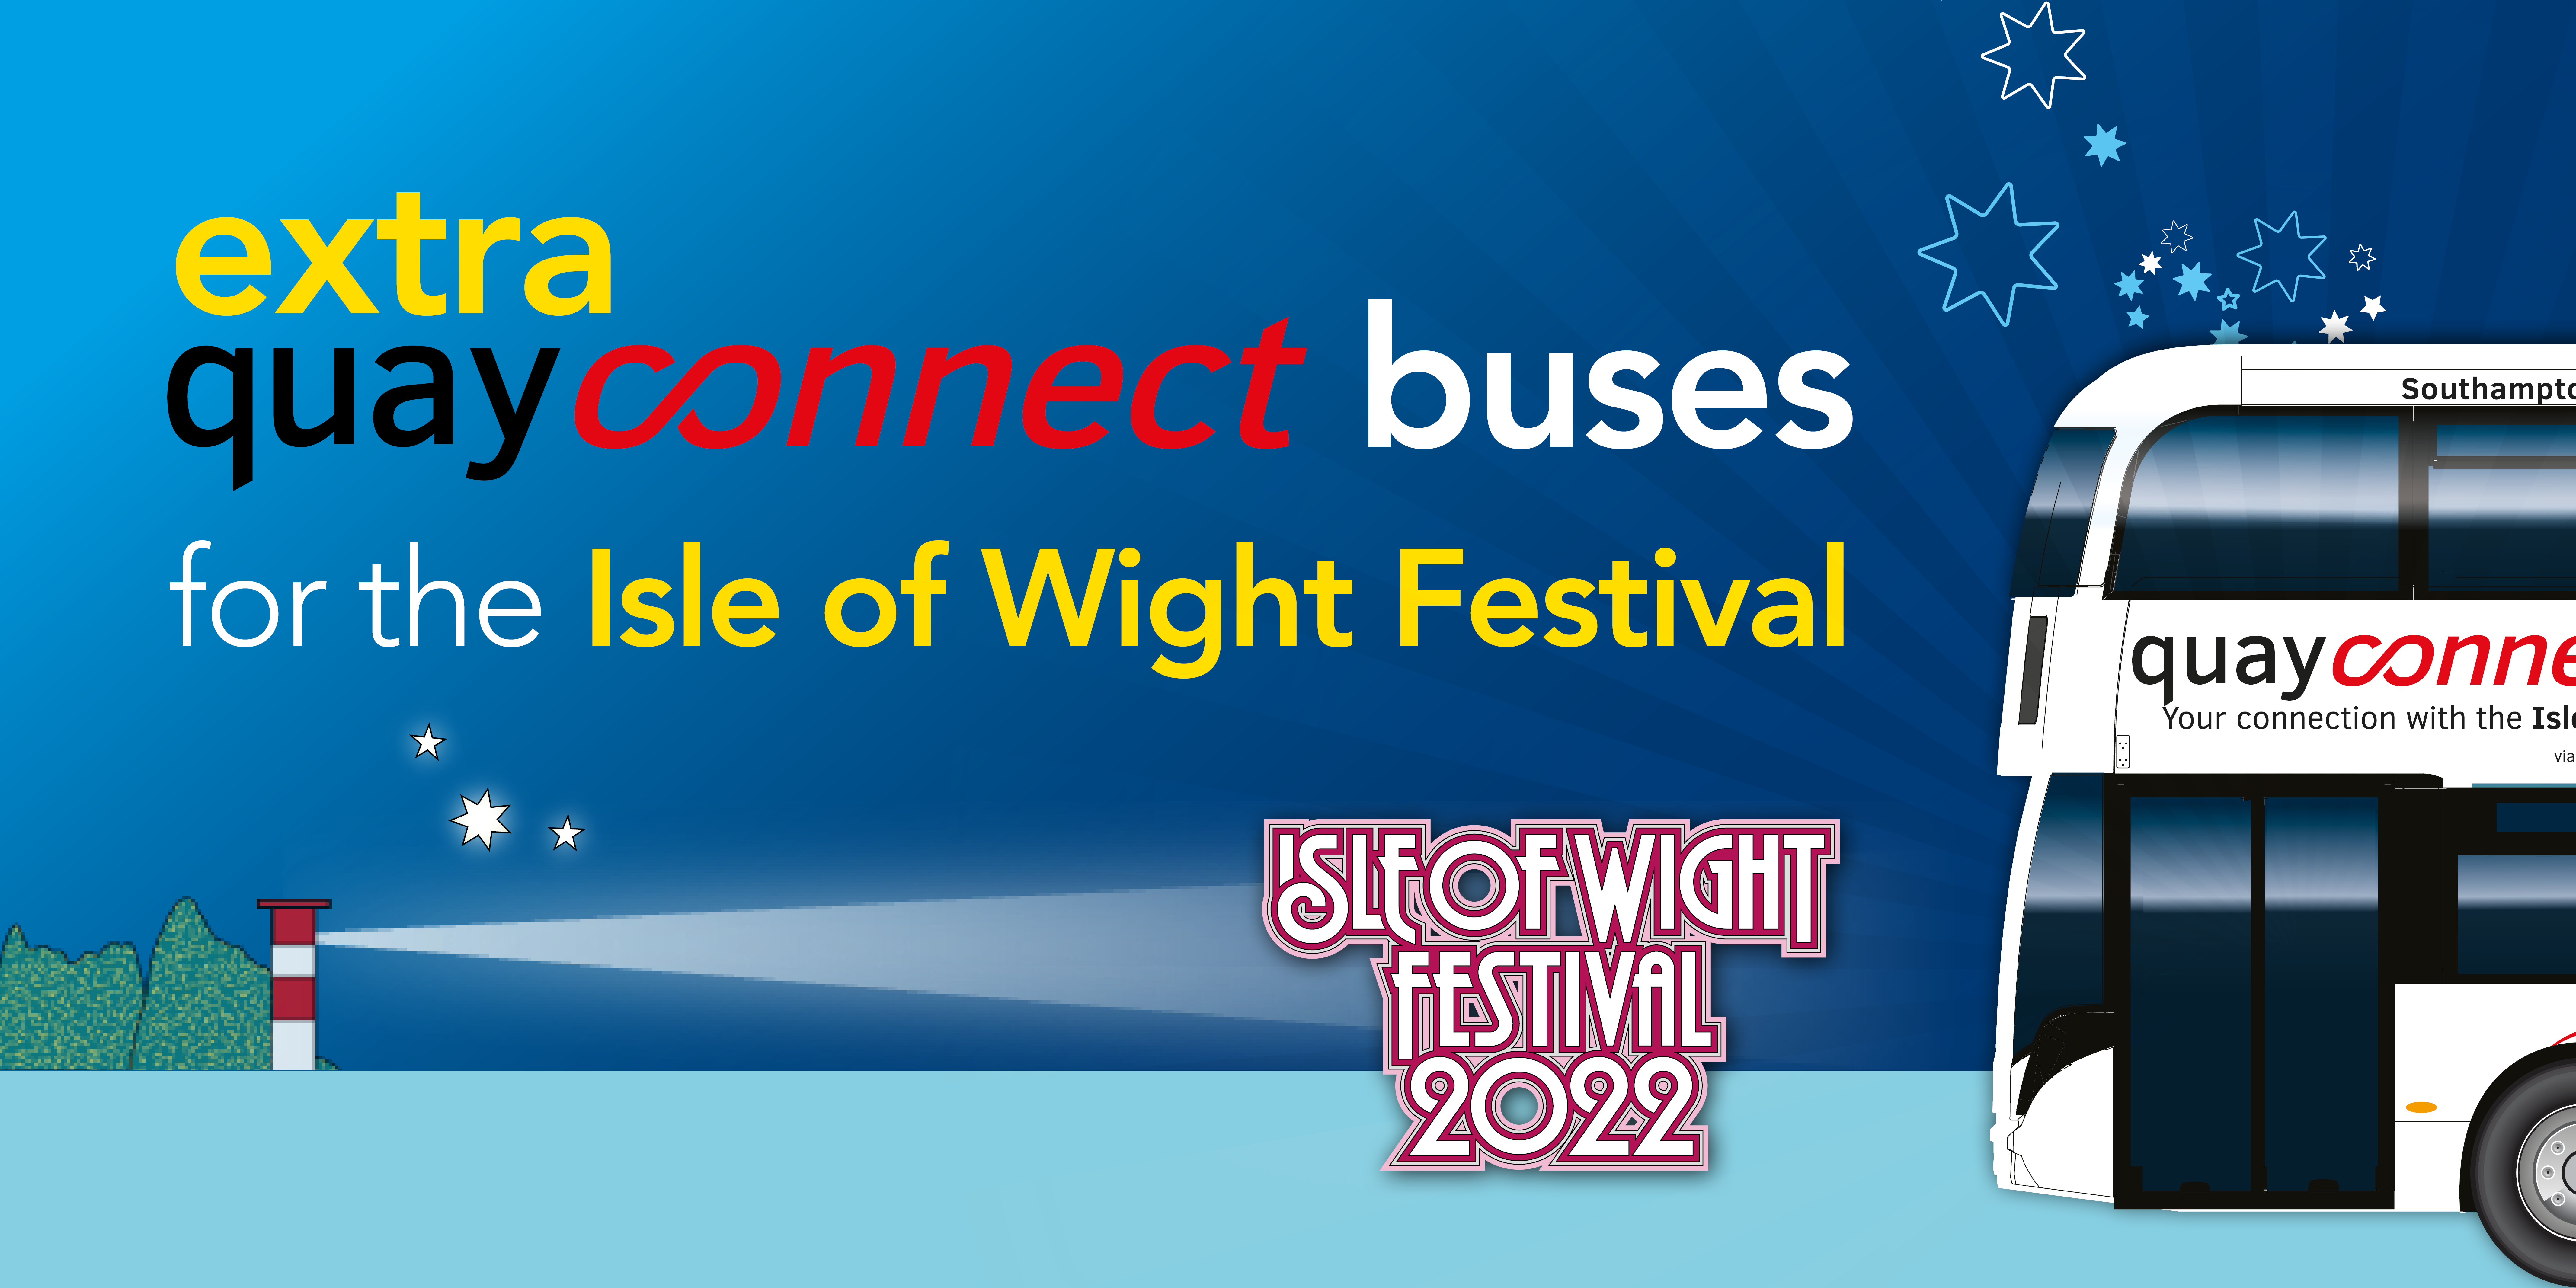 extra buses on quayconnect